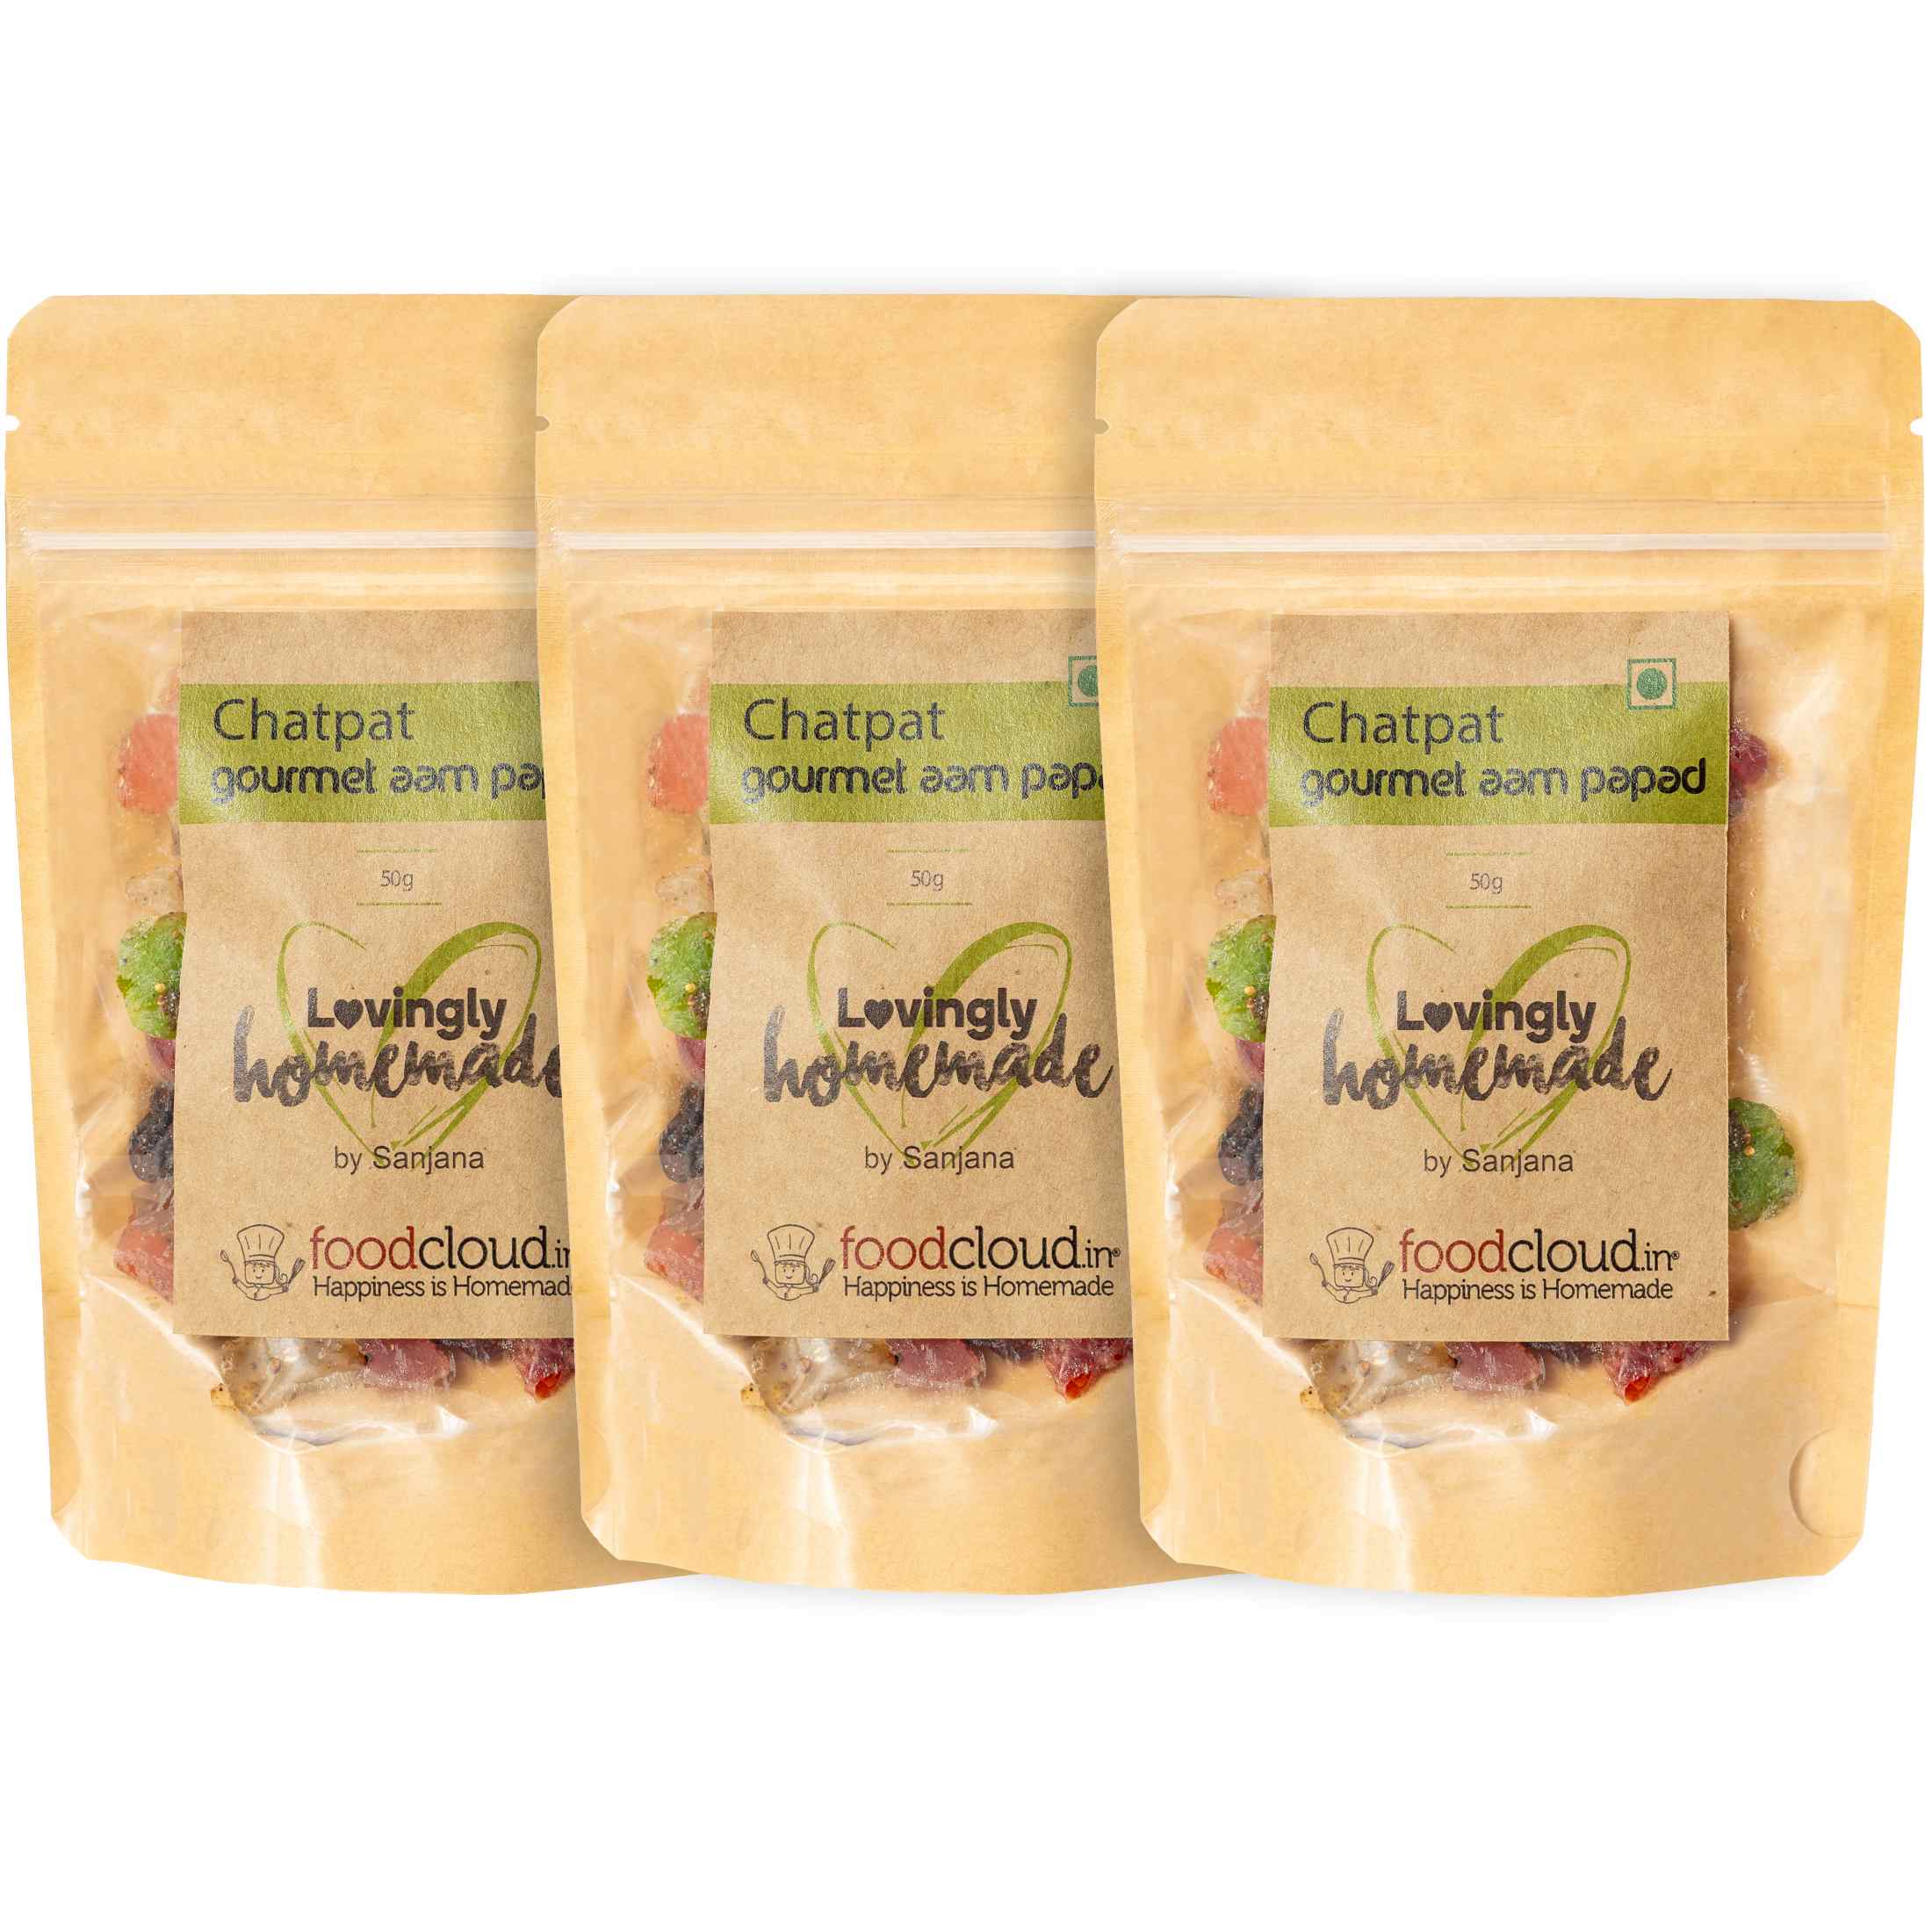 Product: FoodCloud Chatpat Gourmet Aampapad (Pack of 3)